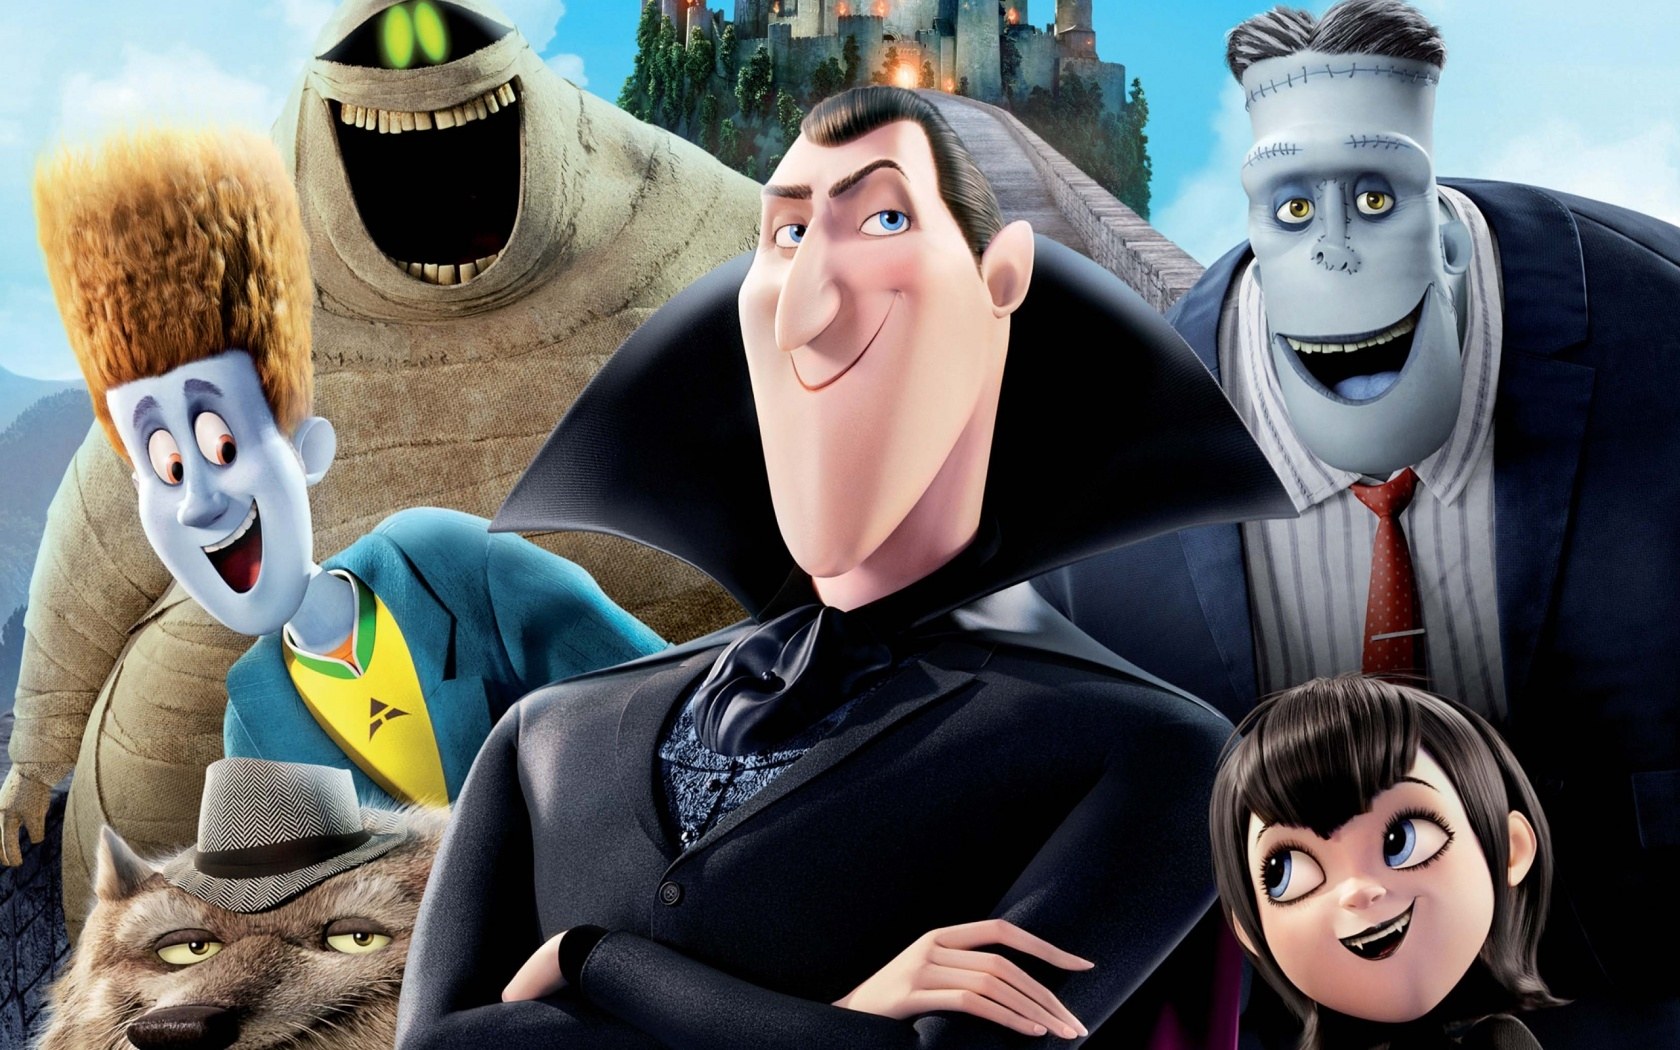 Christmas is here, with lots of winter breeze and snowfall, we're loving our blankets the most. How about an idea of Movie party with friends? Then here are some hollywood fun movies you need to watch. #mustwatch #hollywood #movies #christmas #holidays #merrychristmas #Hoteltransylvania #matilda #popcorn